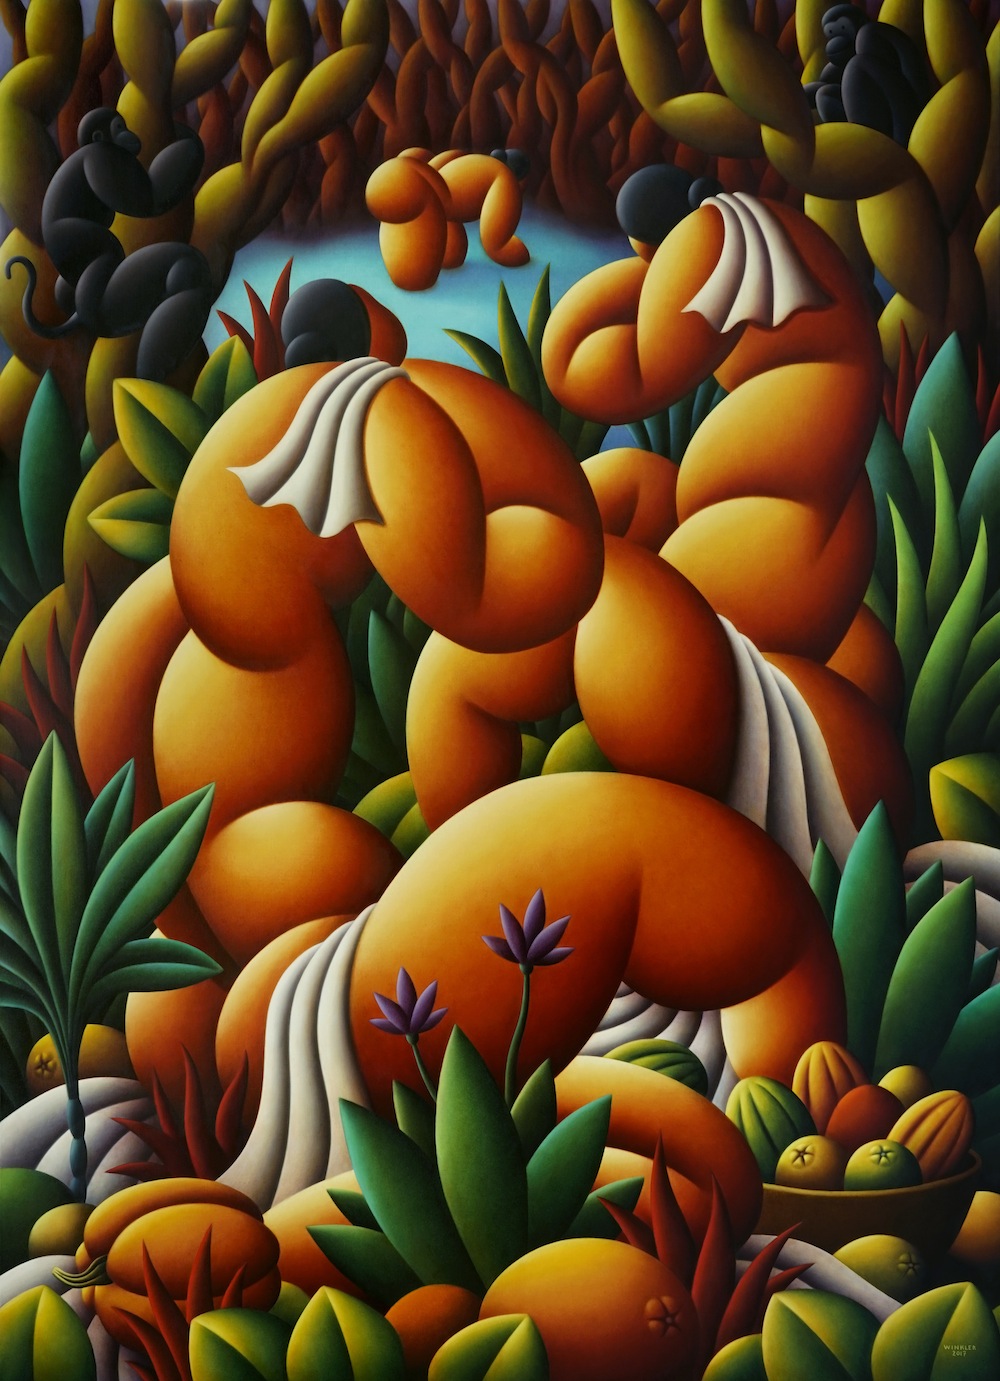 "Fruits of Fortune by the Lagoon" by Richard Wrinkler. 